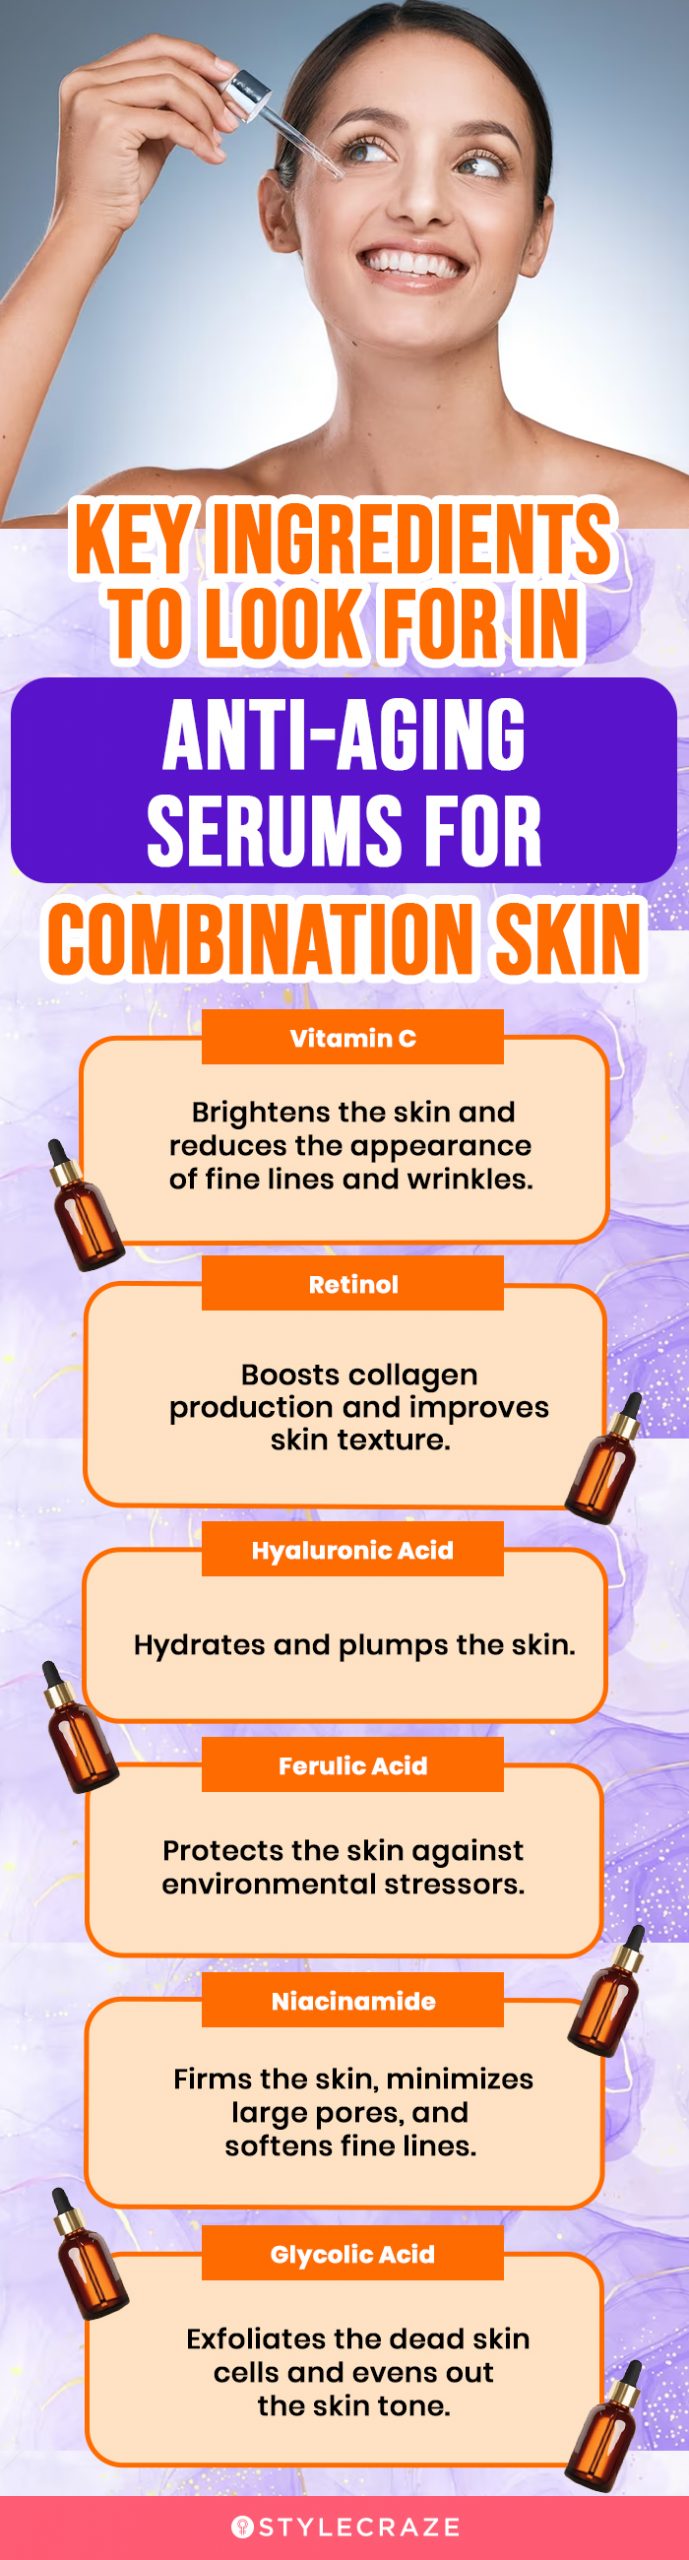 Key Ingredients In Anti-Aging Serums For Combination Skin (infographic)